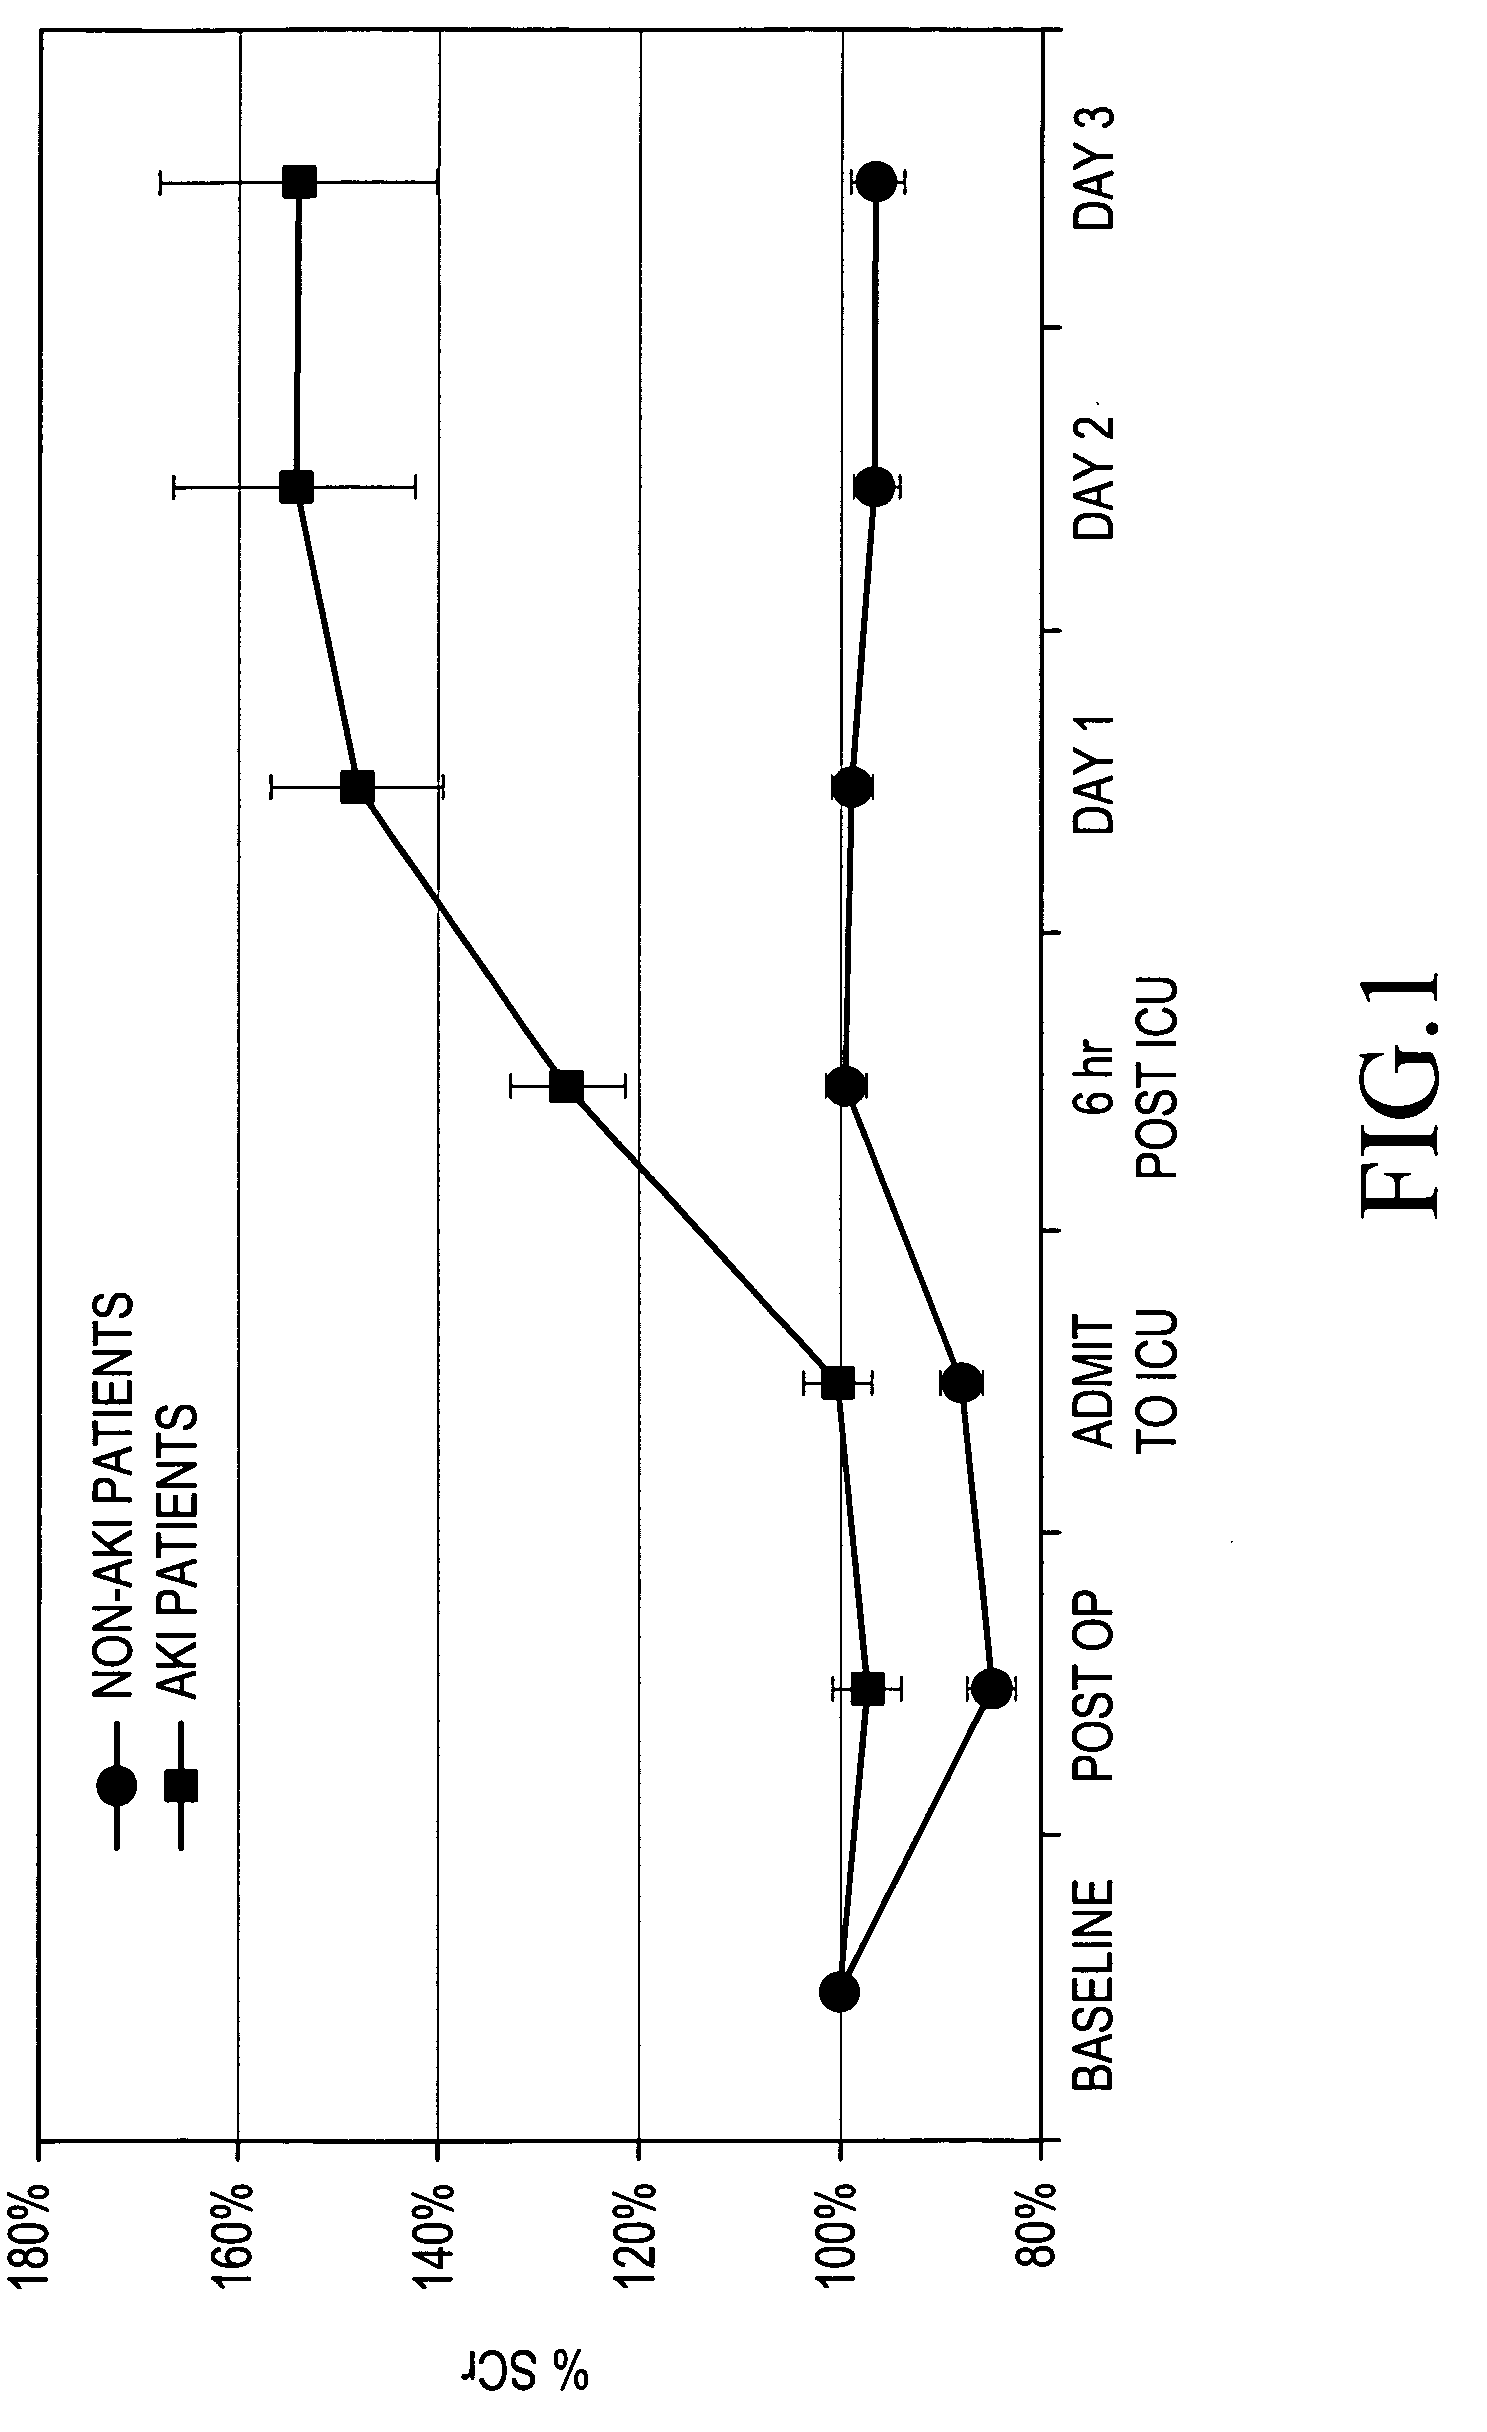 Method for the early identification and prediction of kidney injury